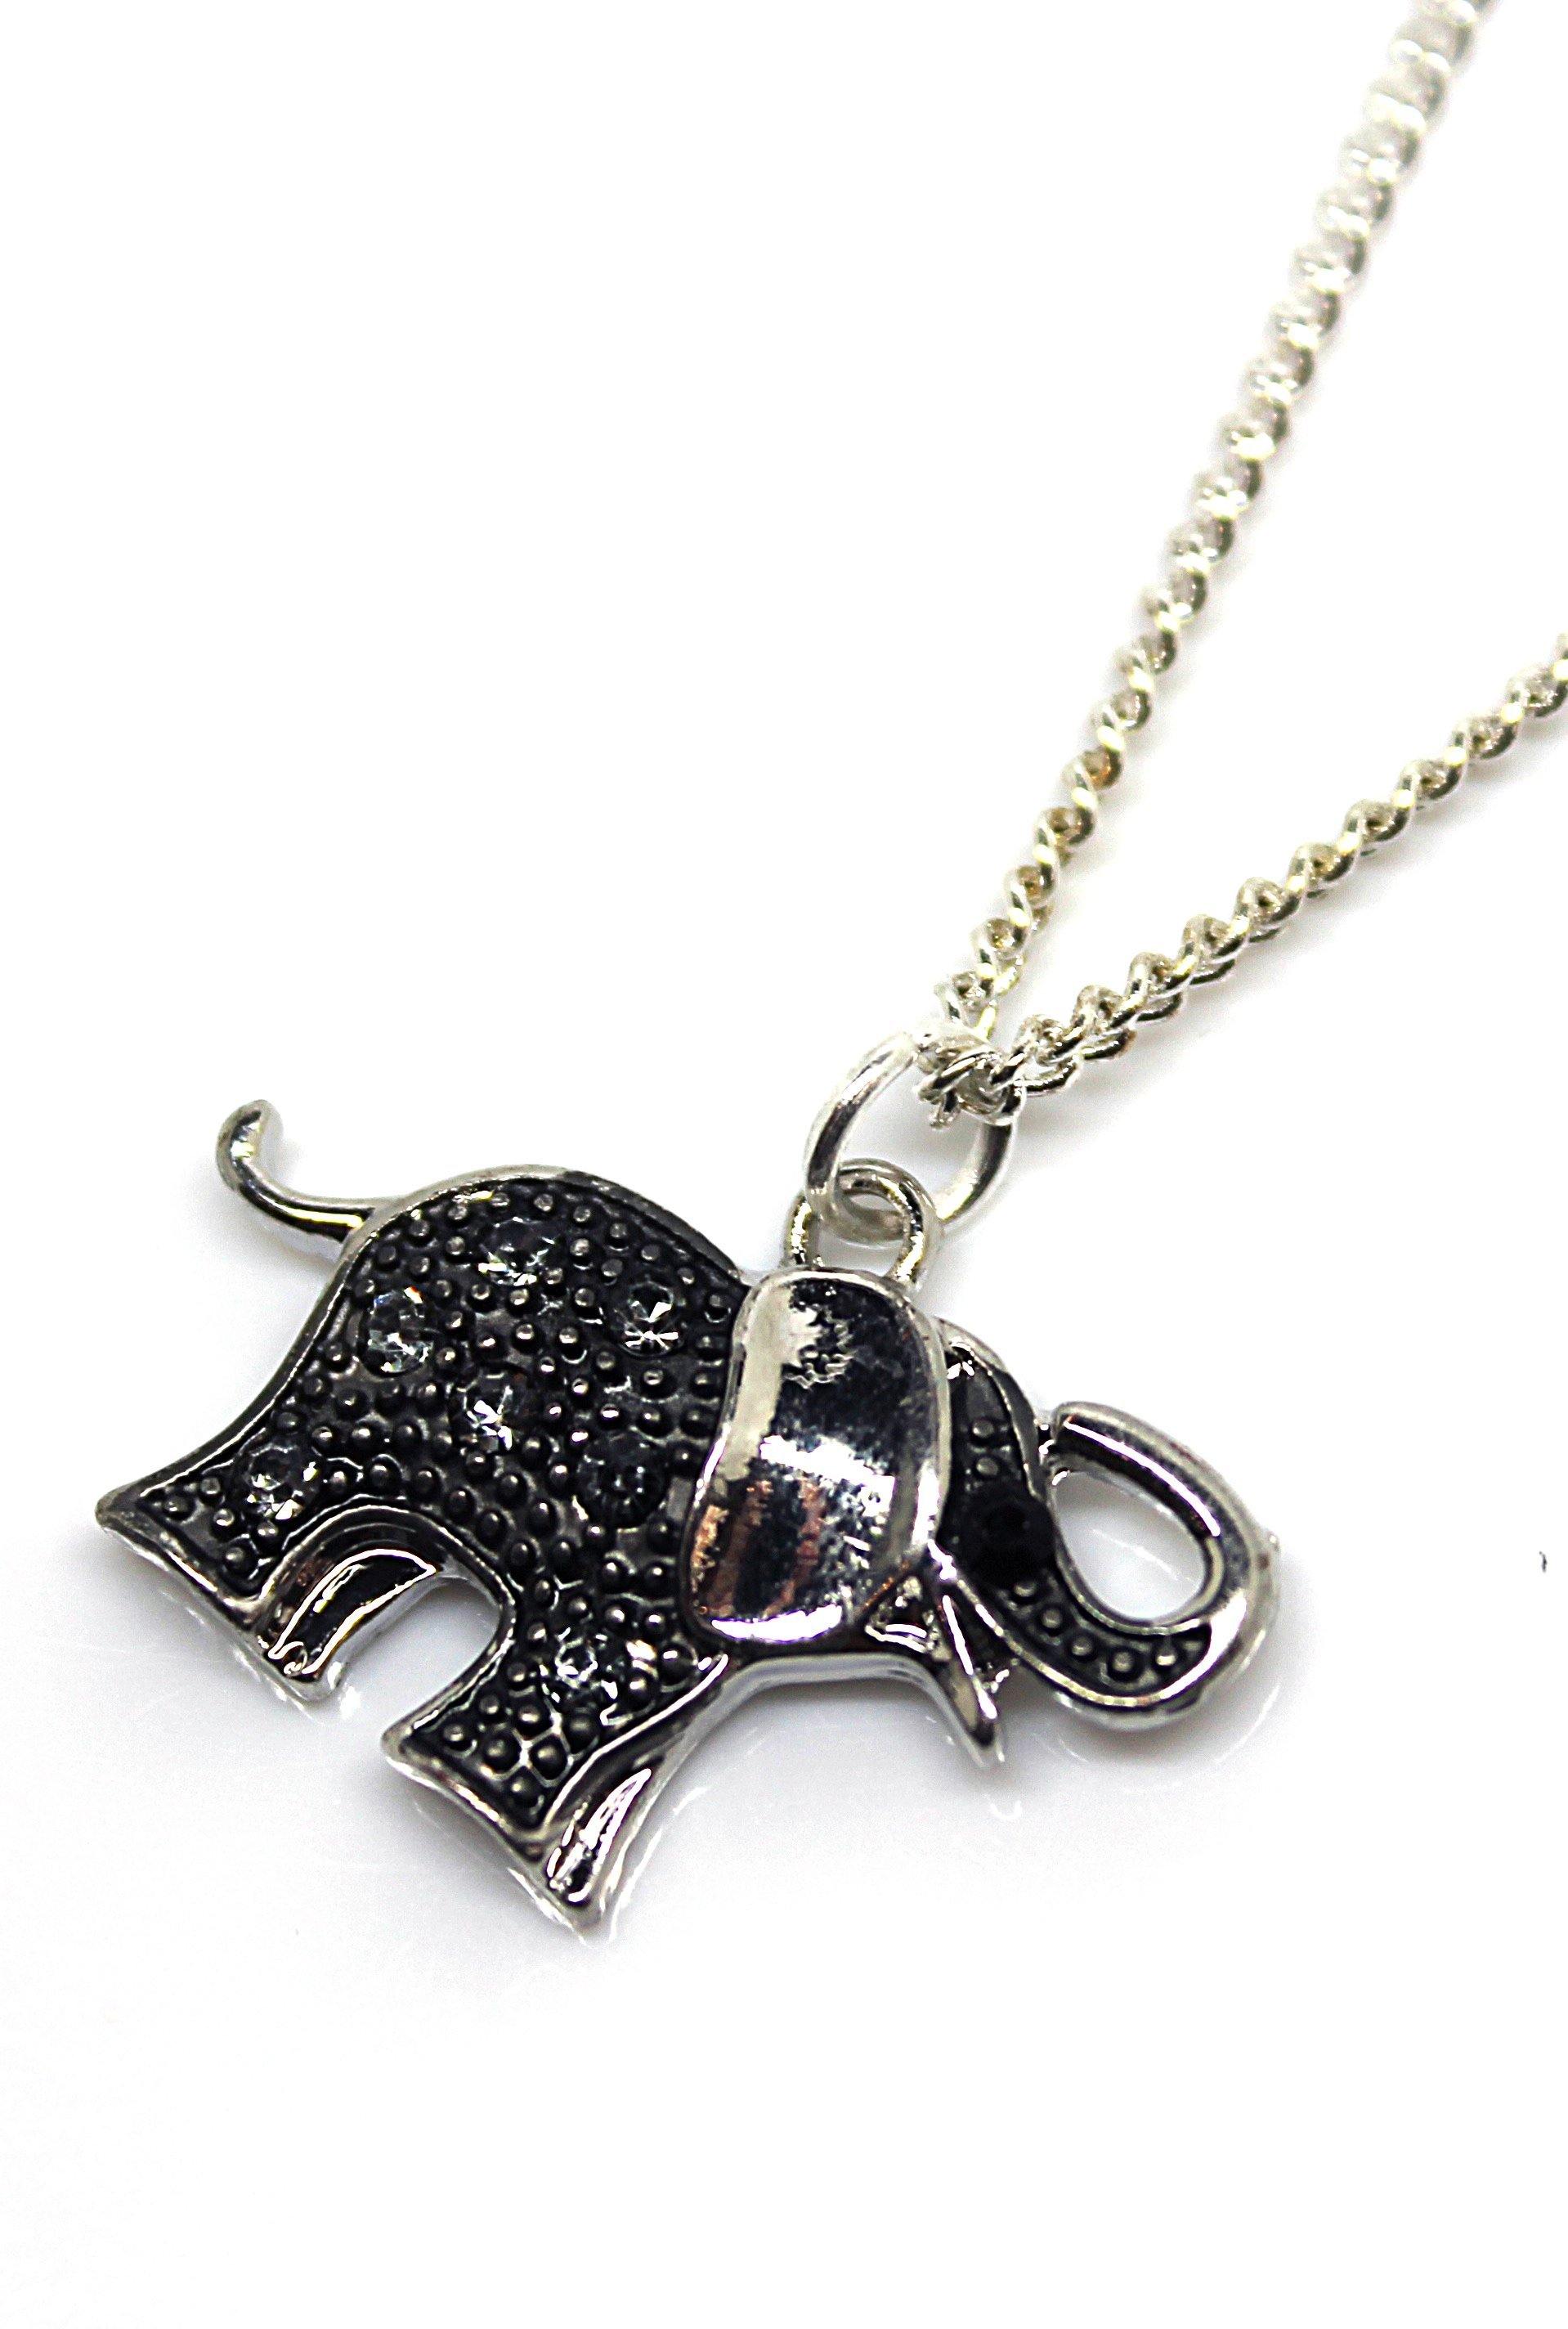 Elephant Grey Necklace - Wildtouch - Wildtouch